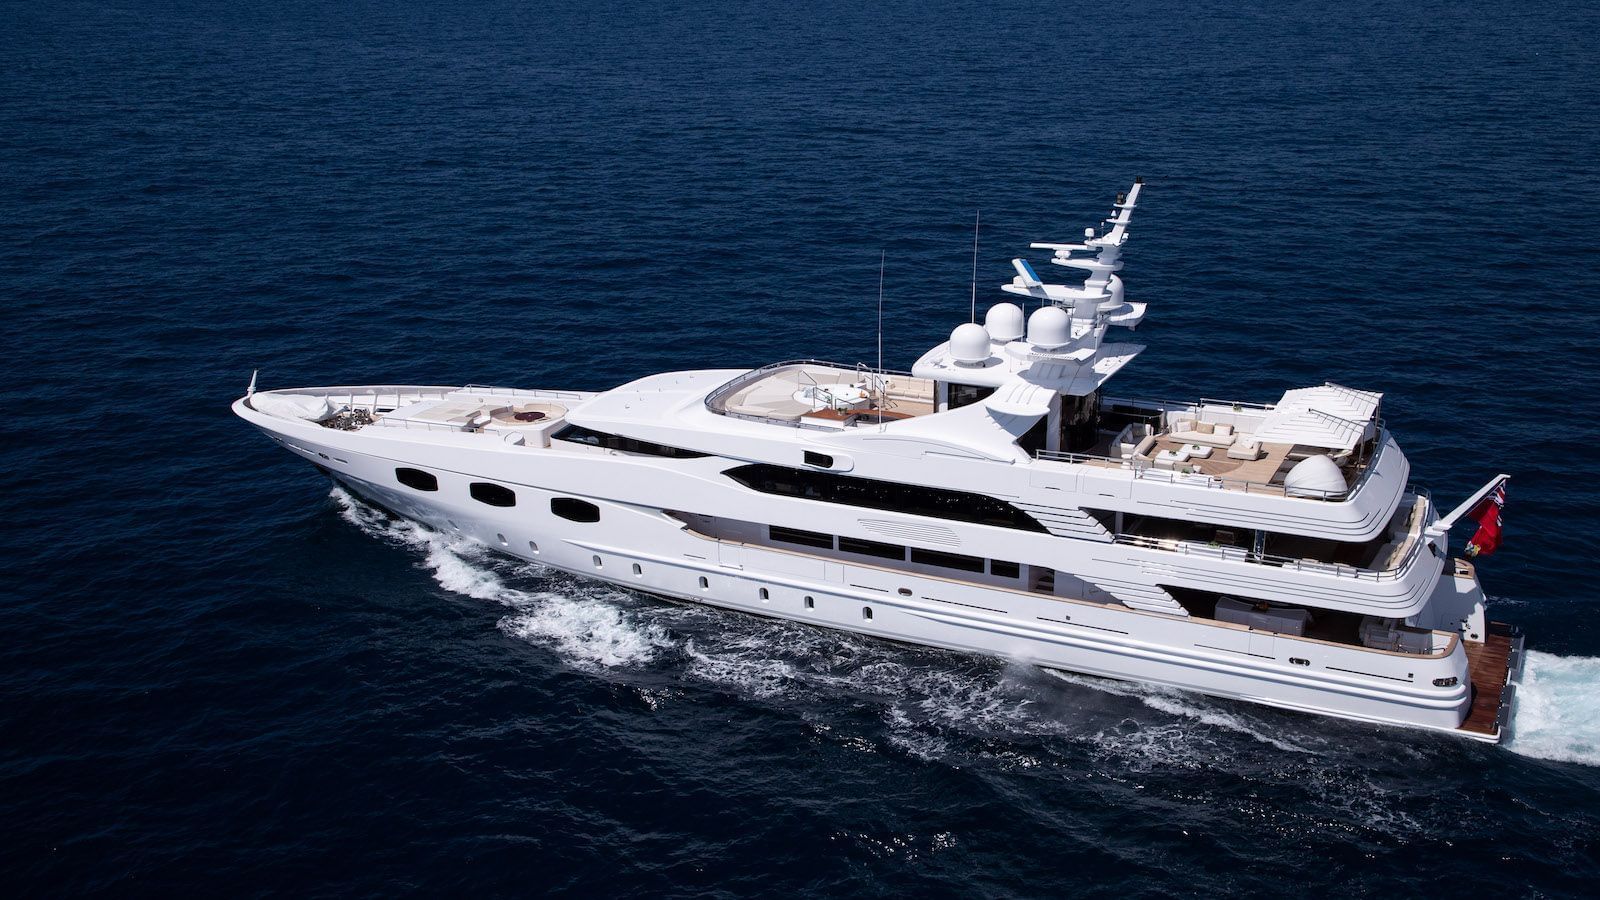 Symphony Yacht • Feadship • 2015 • For Sale & For Charter